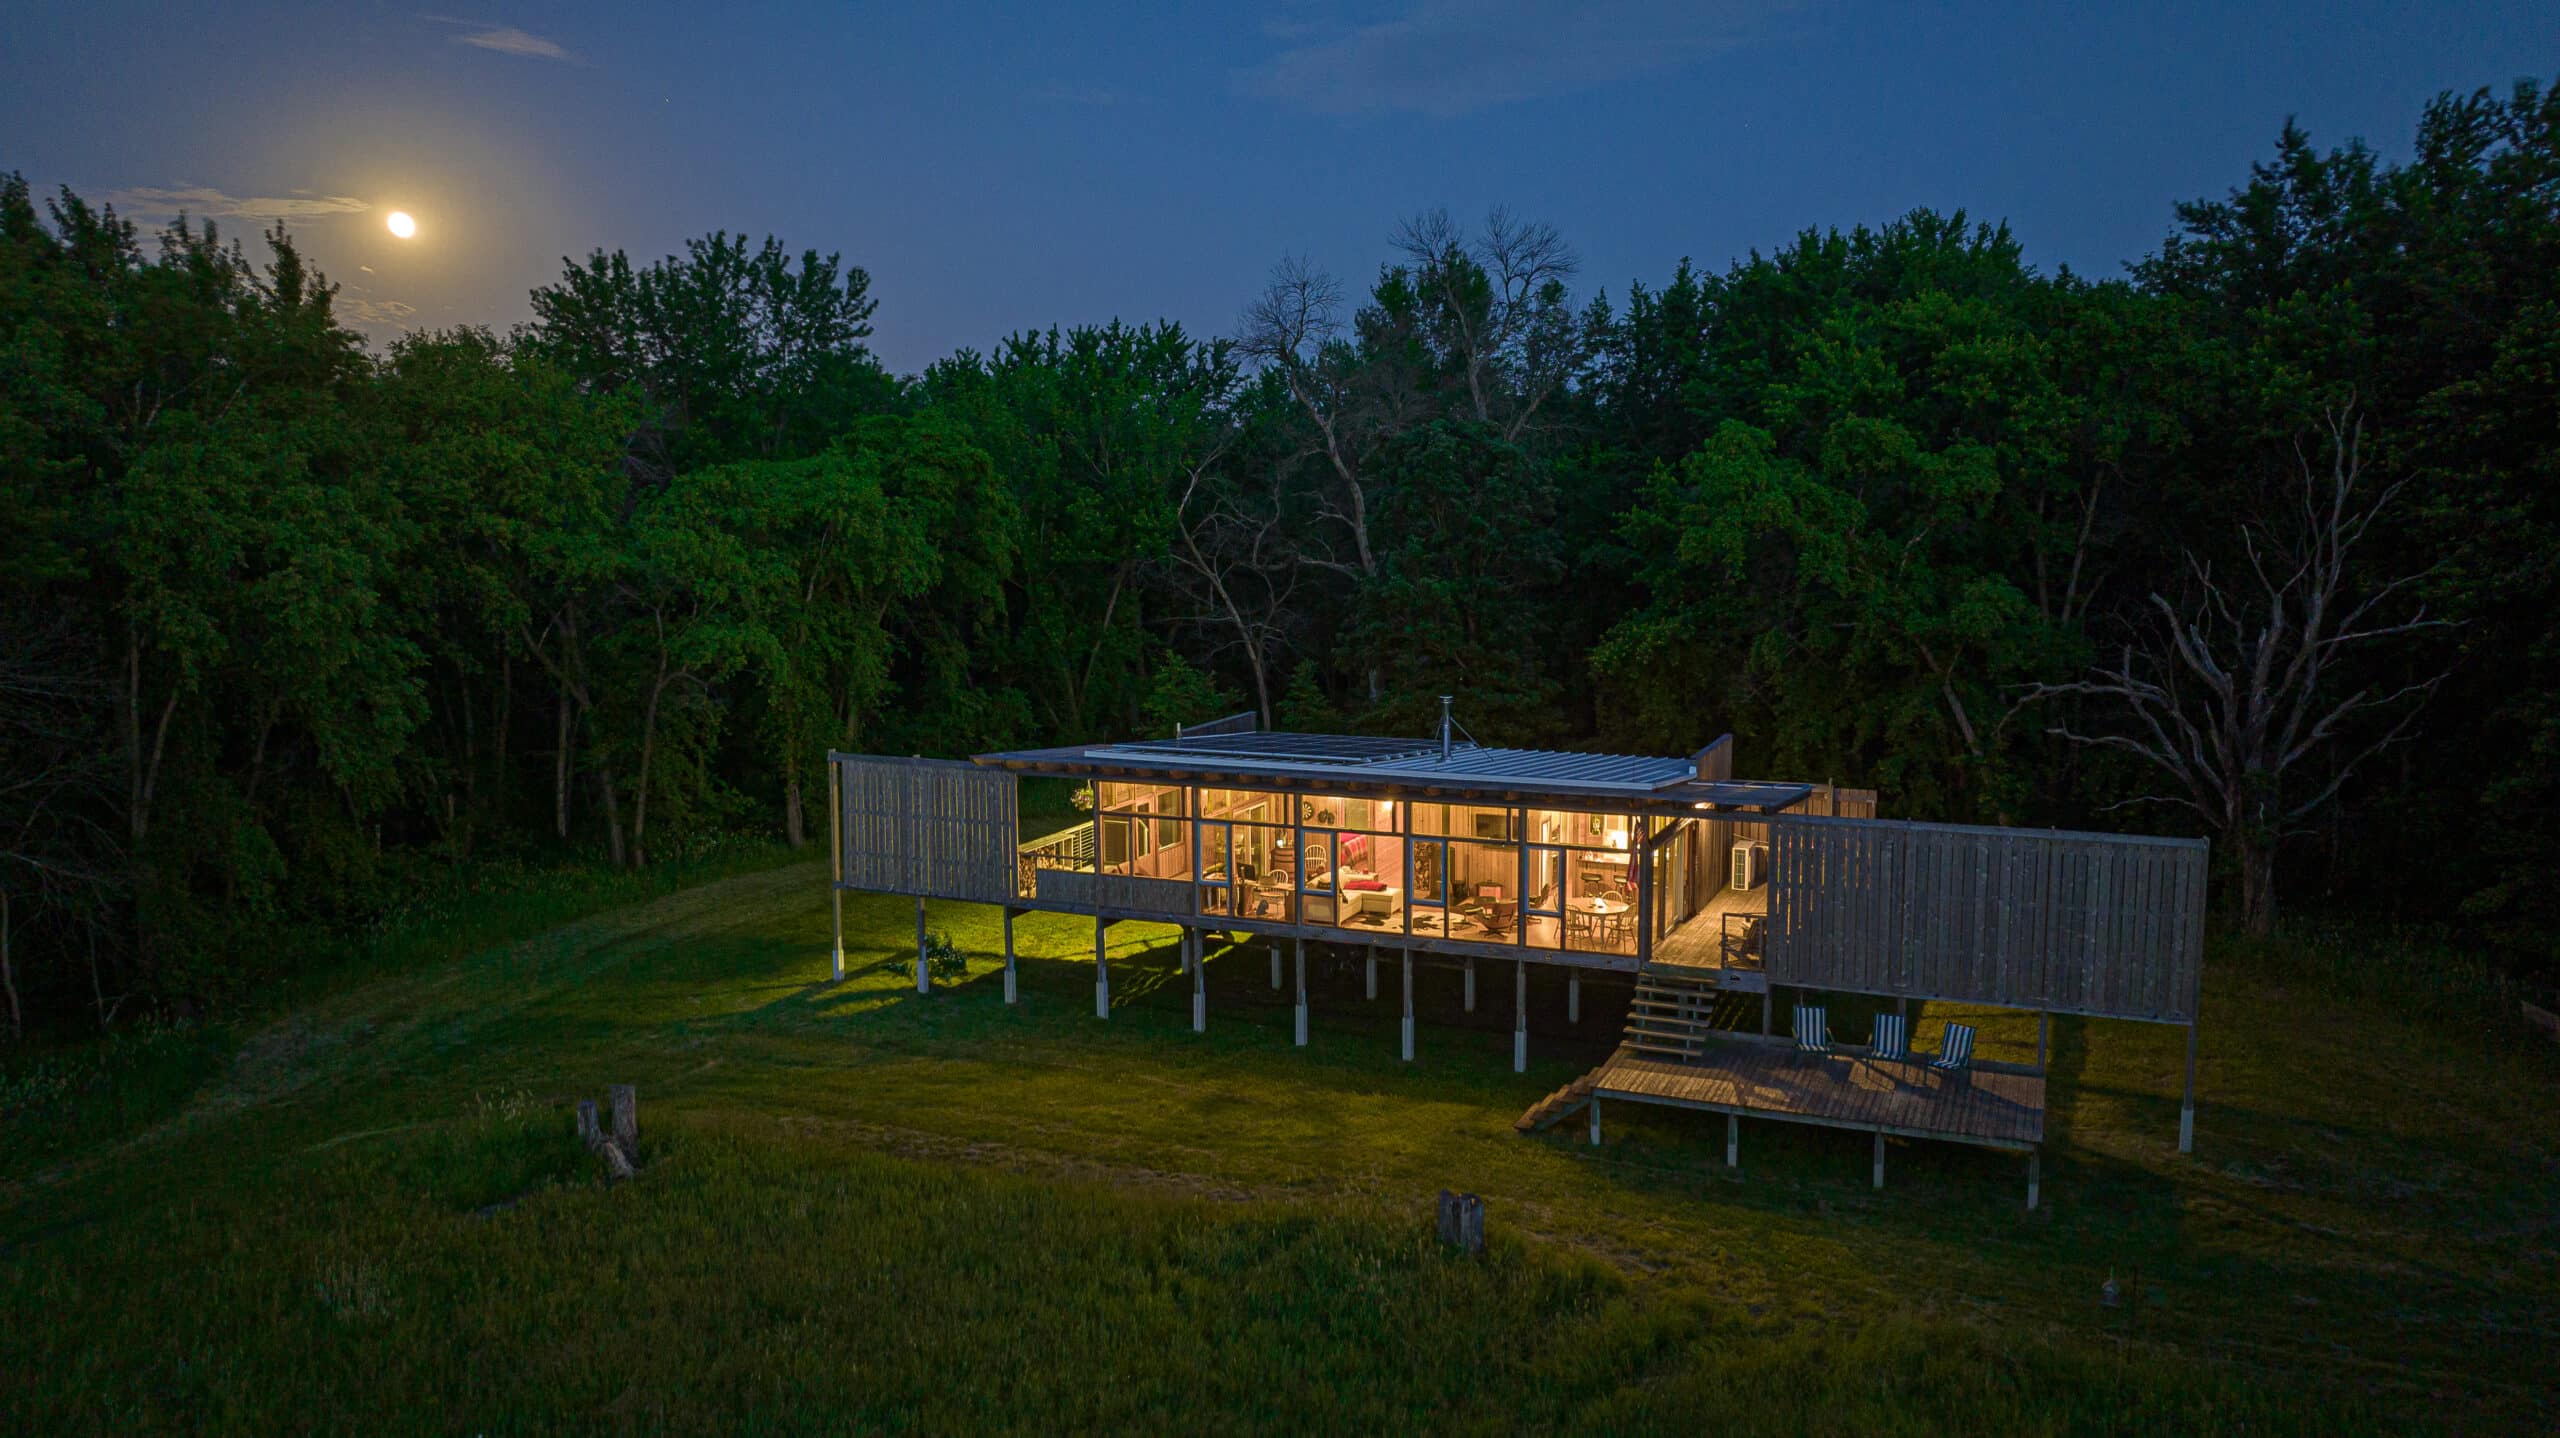 Steven Ristings Off Grid Home lit up at night